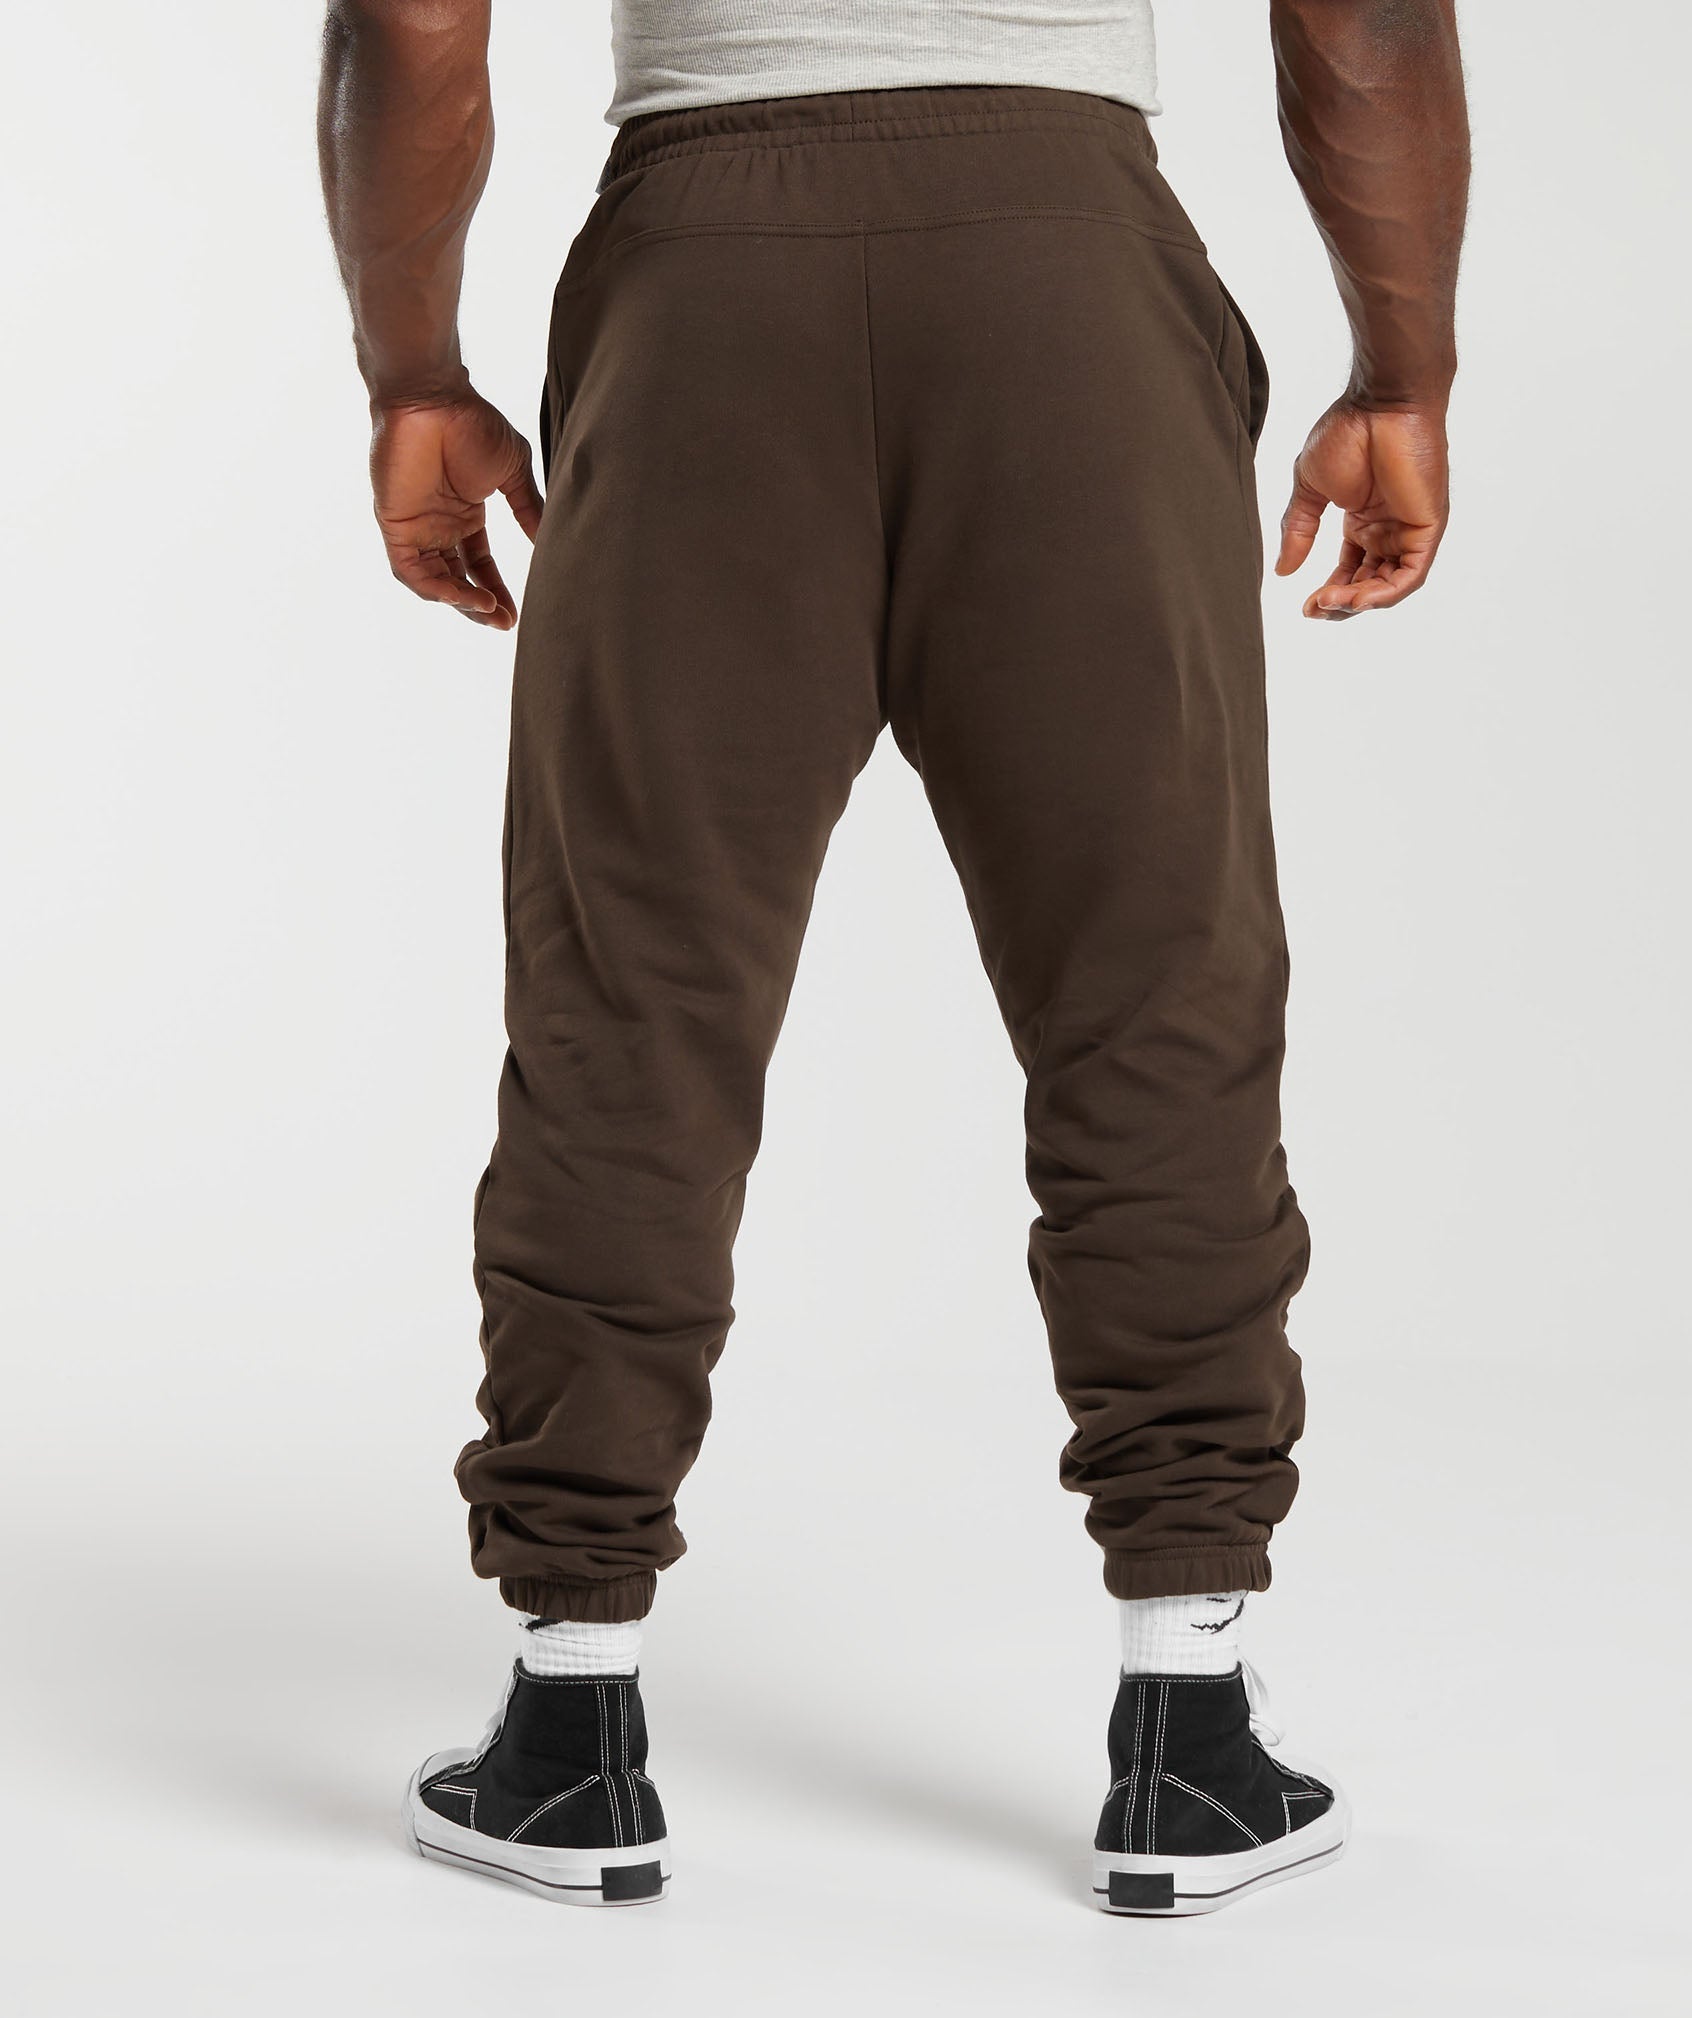 Gymshark Mens Global Lifting Oversized Pants, M, Archive Brown NEW!!